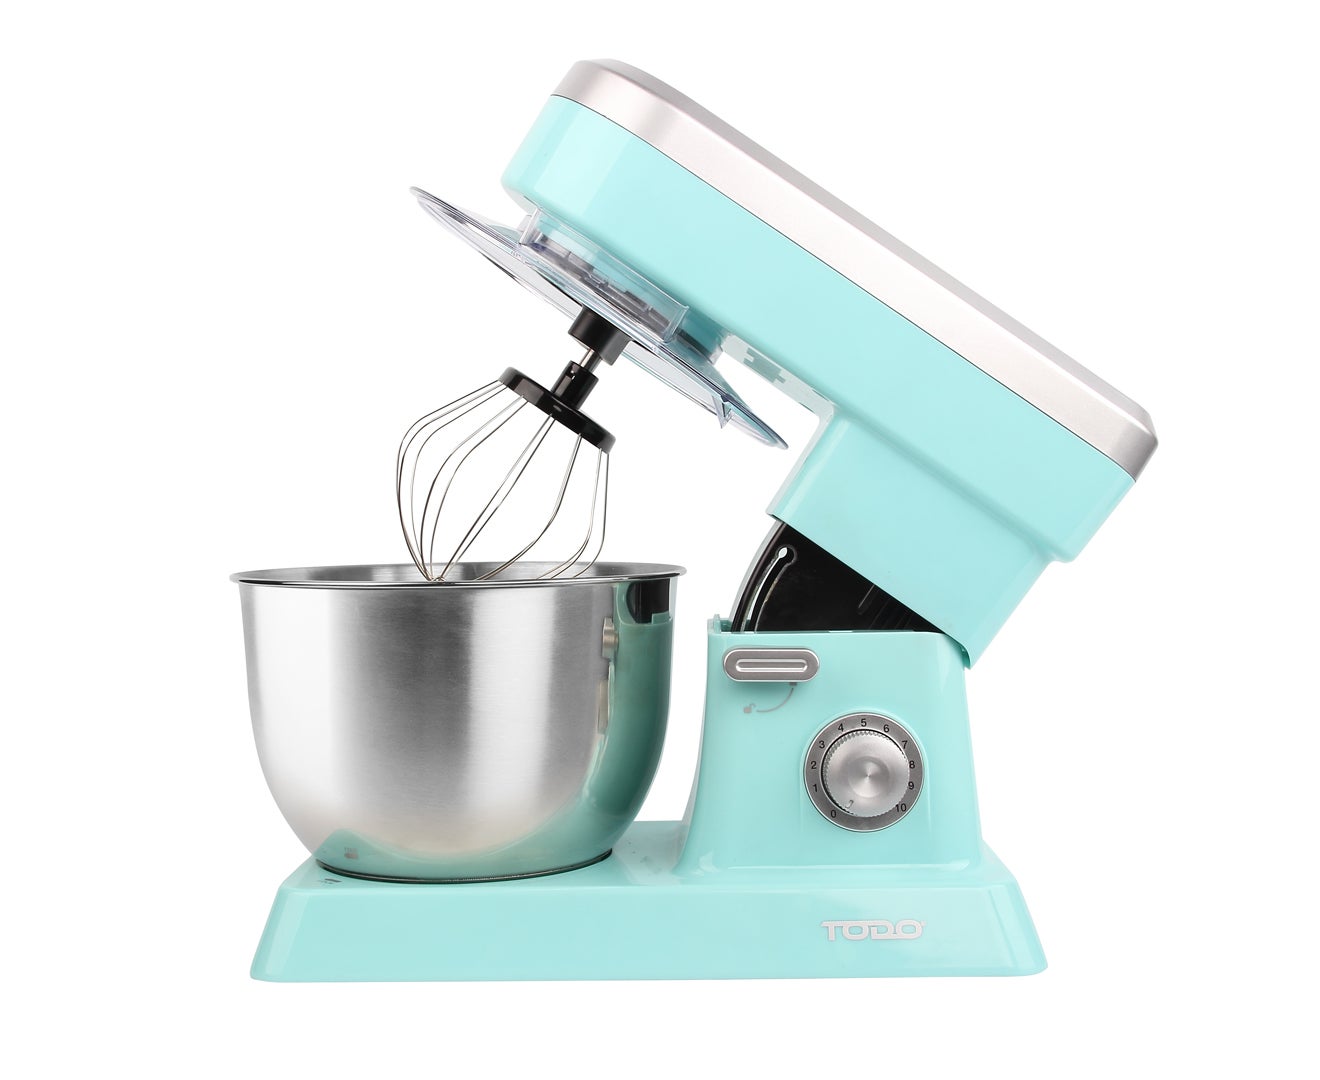 Todo 1200w Electric Stand Mixer 6 2l Stainless Steel Bowl 10 Speed 646862 02 ?v=637115025779680987